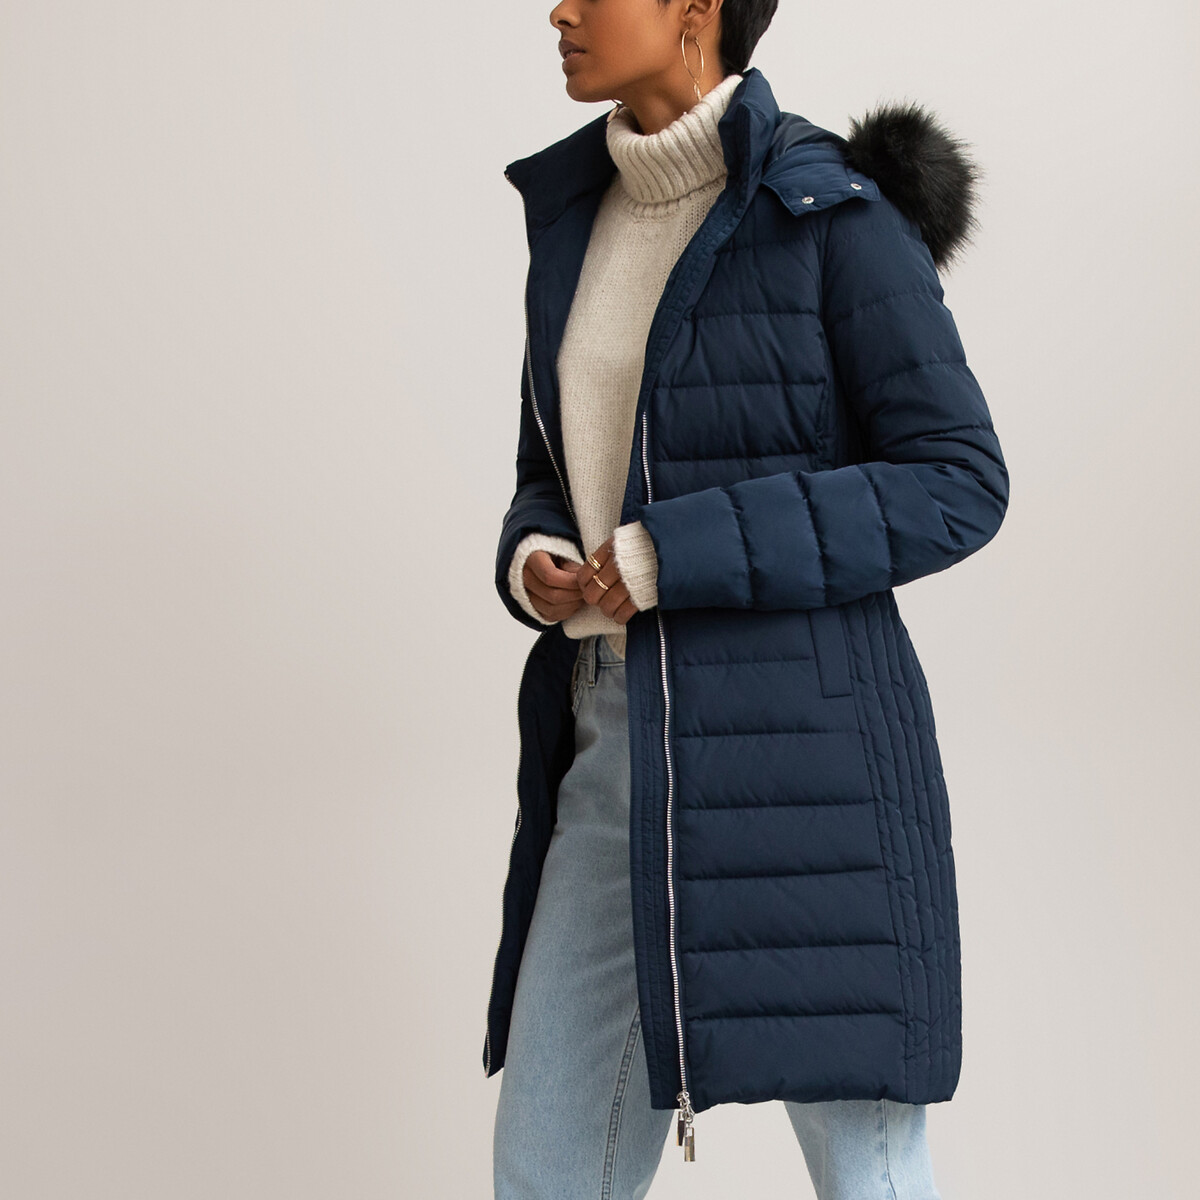 Long Showerproof Padded Jacket With, Navy Blue Coat With Fur Hood And Belt